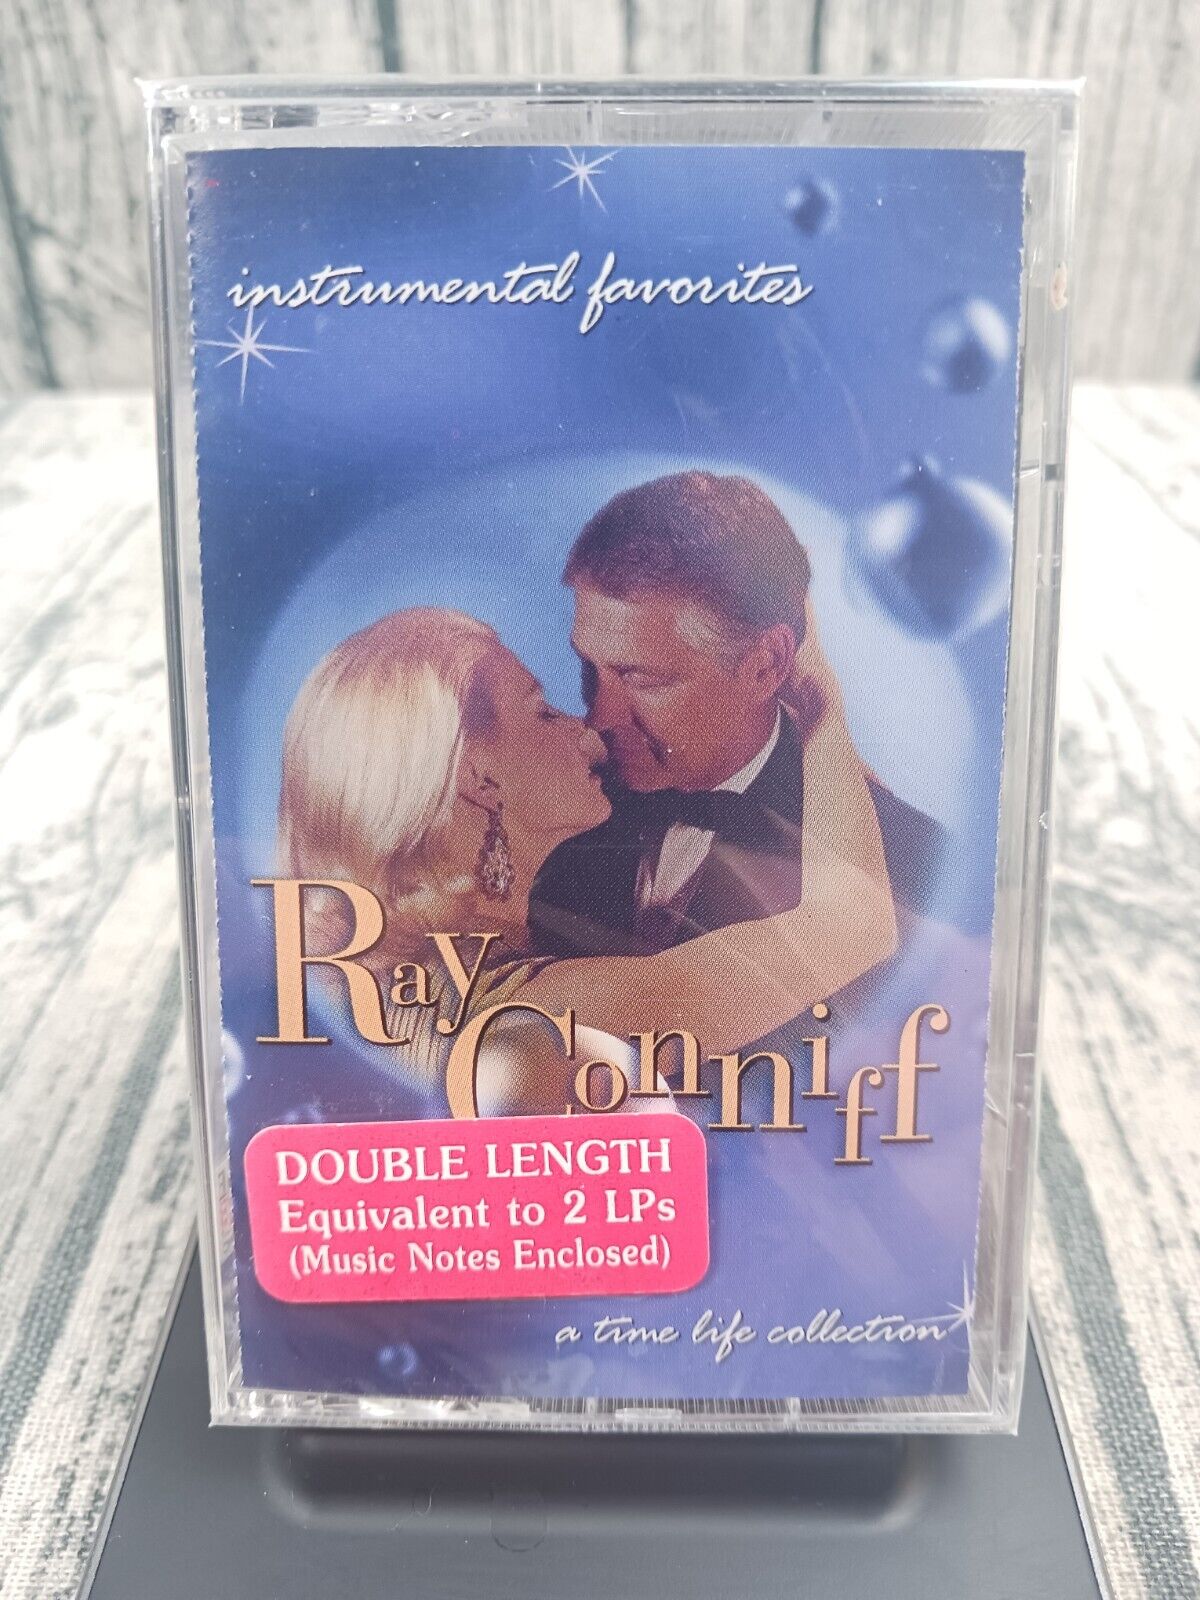 Ray Conniff - Instrumental Favorites A Time Life Collection (Cassette, 1994) New